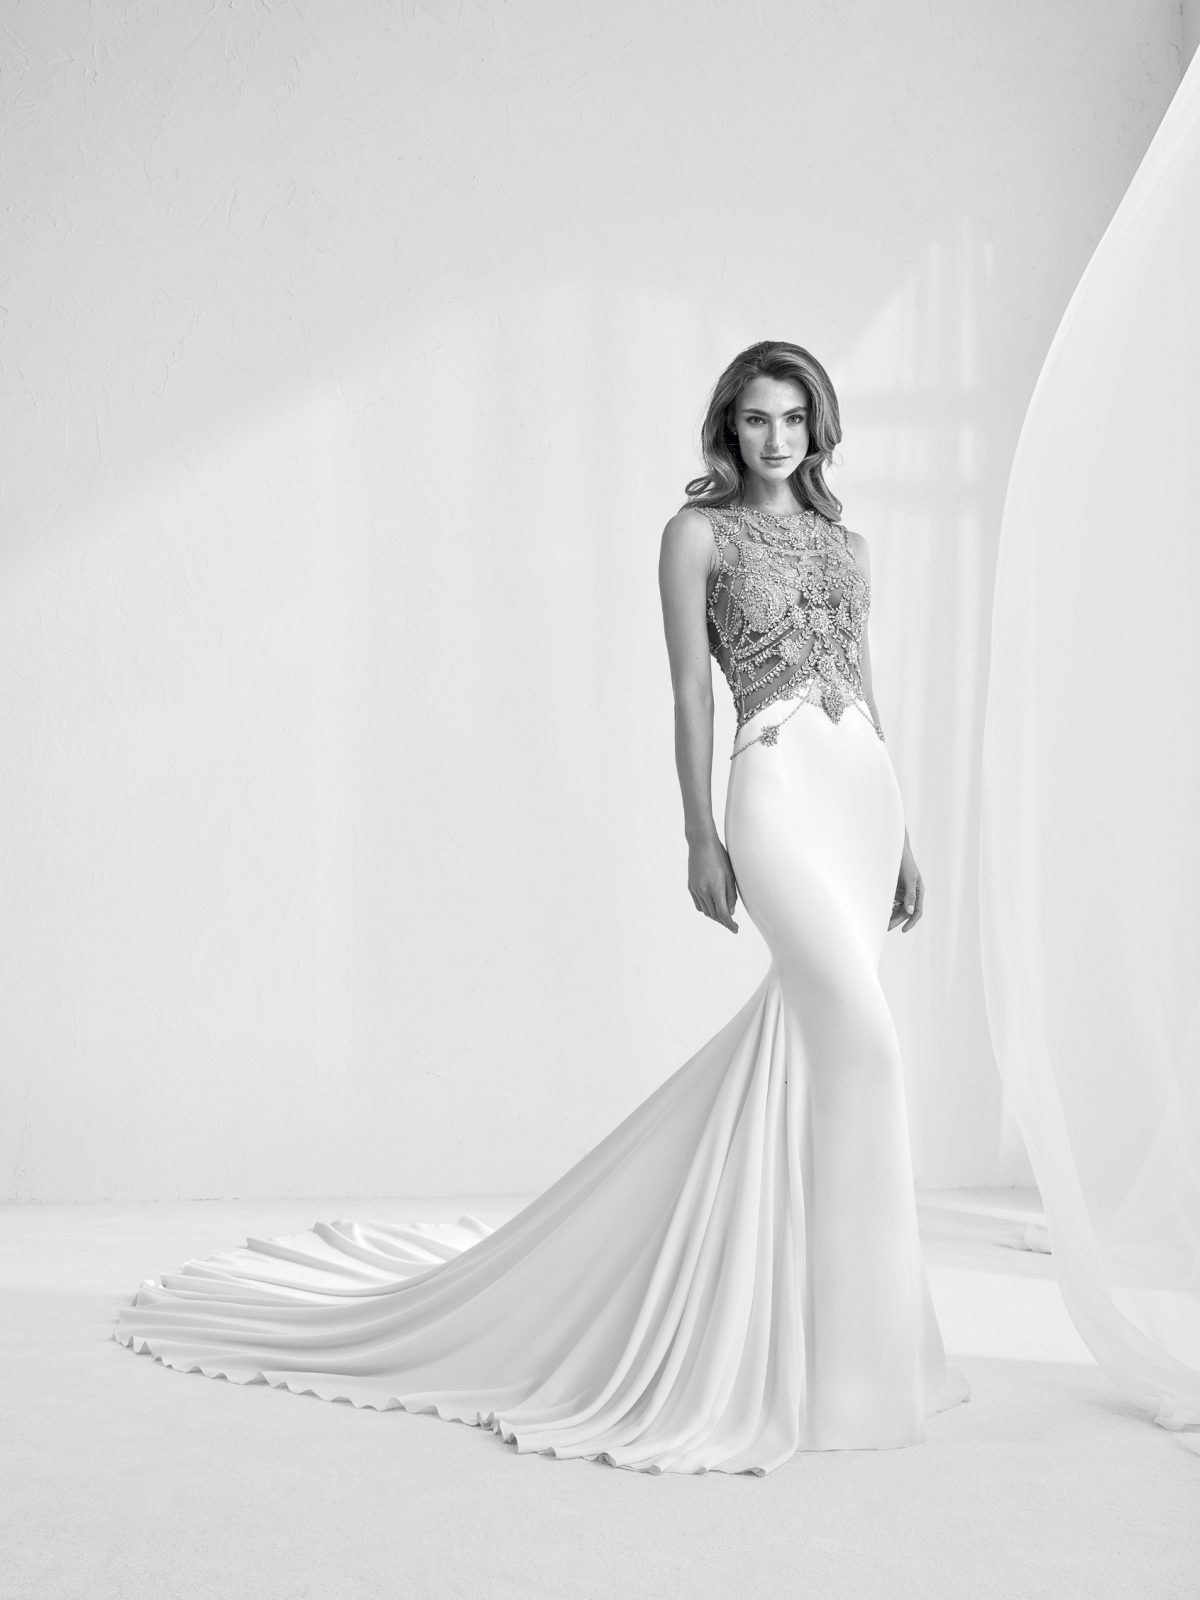 Fall in love with the Pronovias 2018 Bridal Preview Collection - Perfete